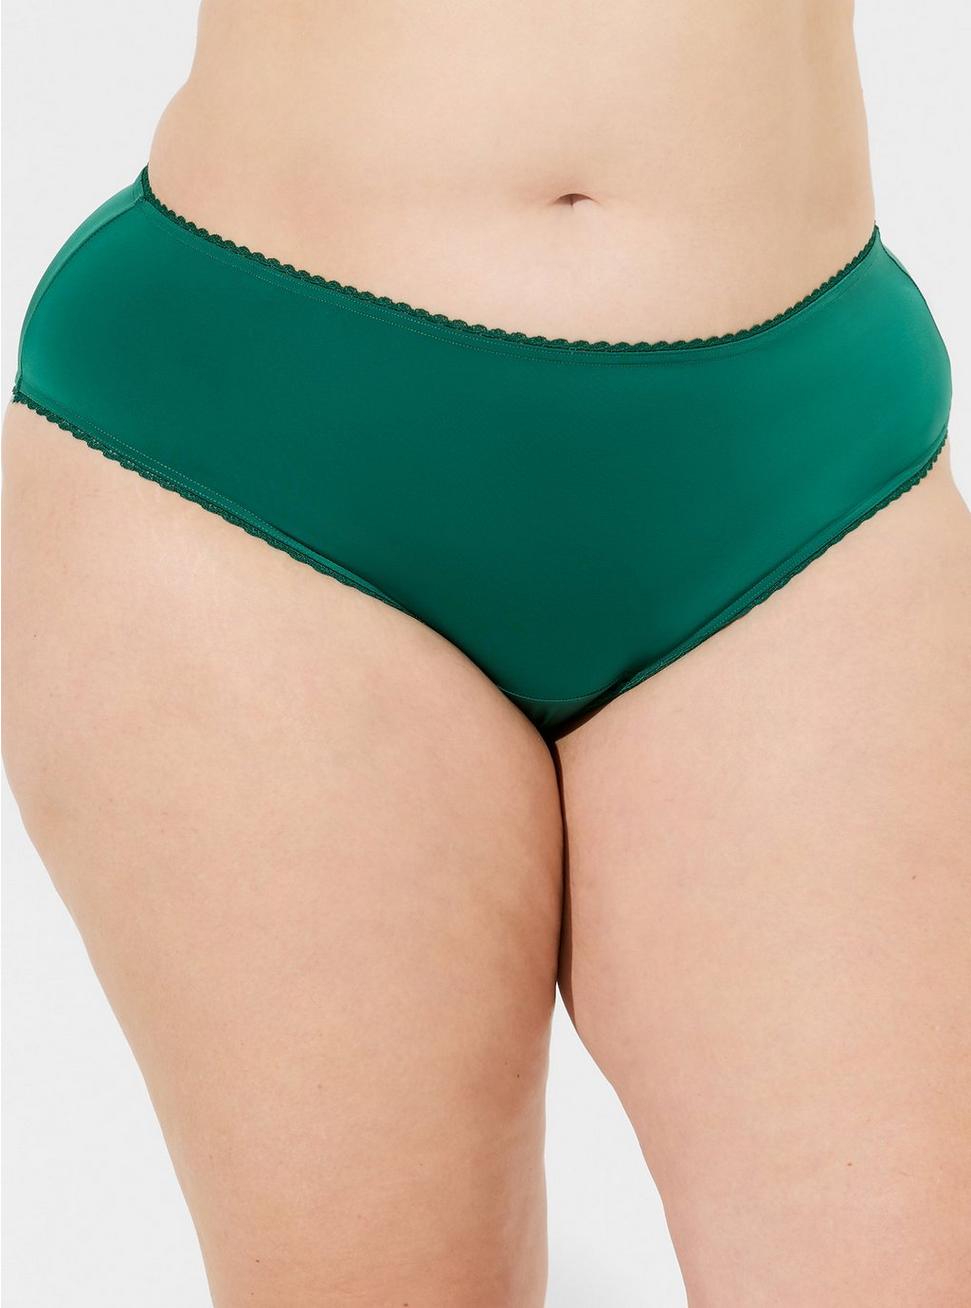 Plus Size - Second Skin Microfiber Hipster Panty With Cage Back